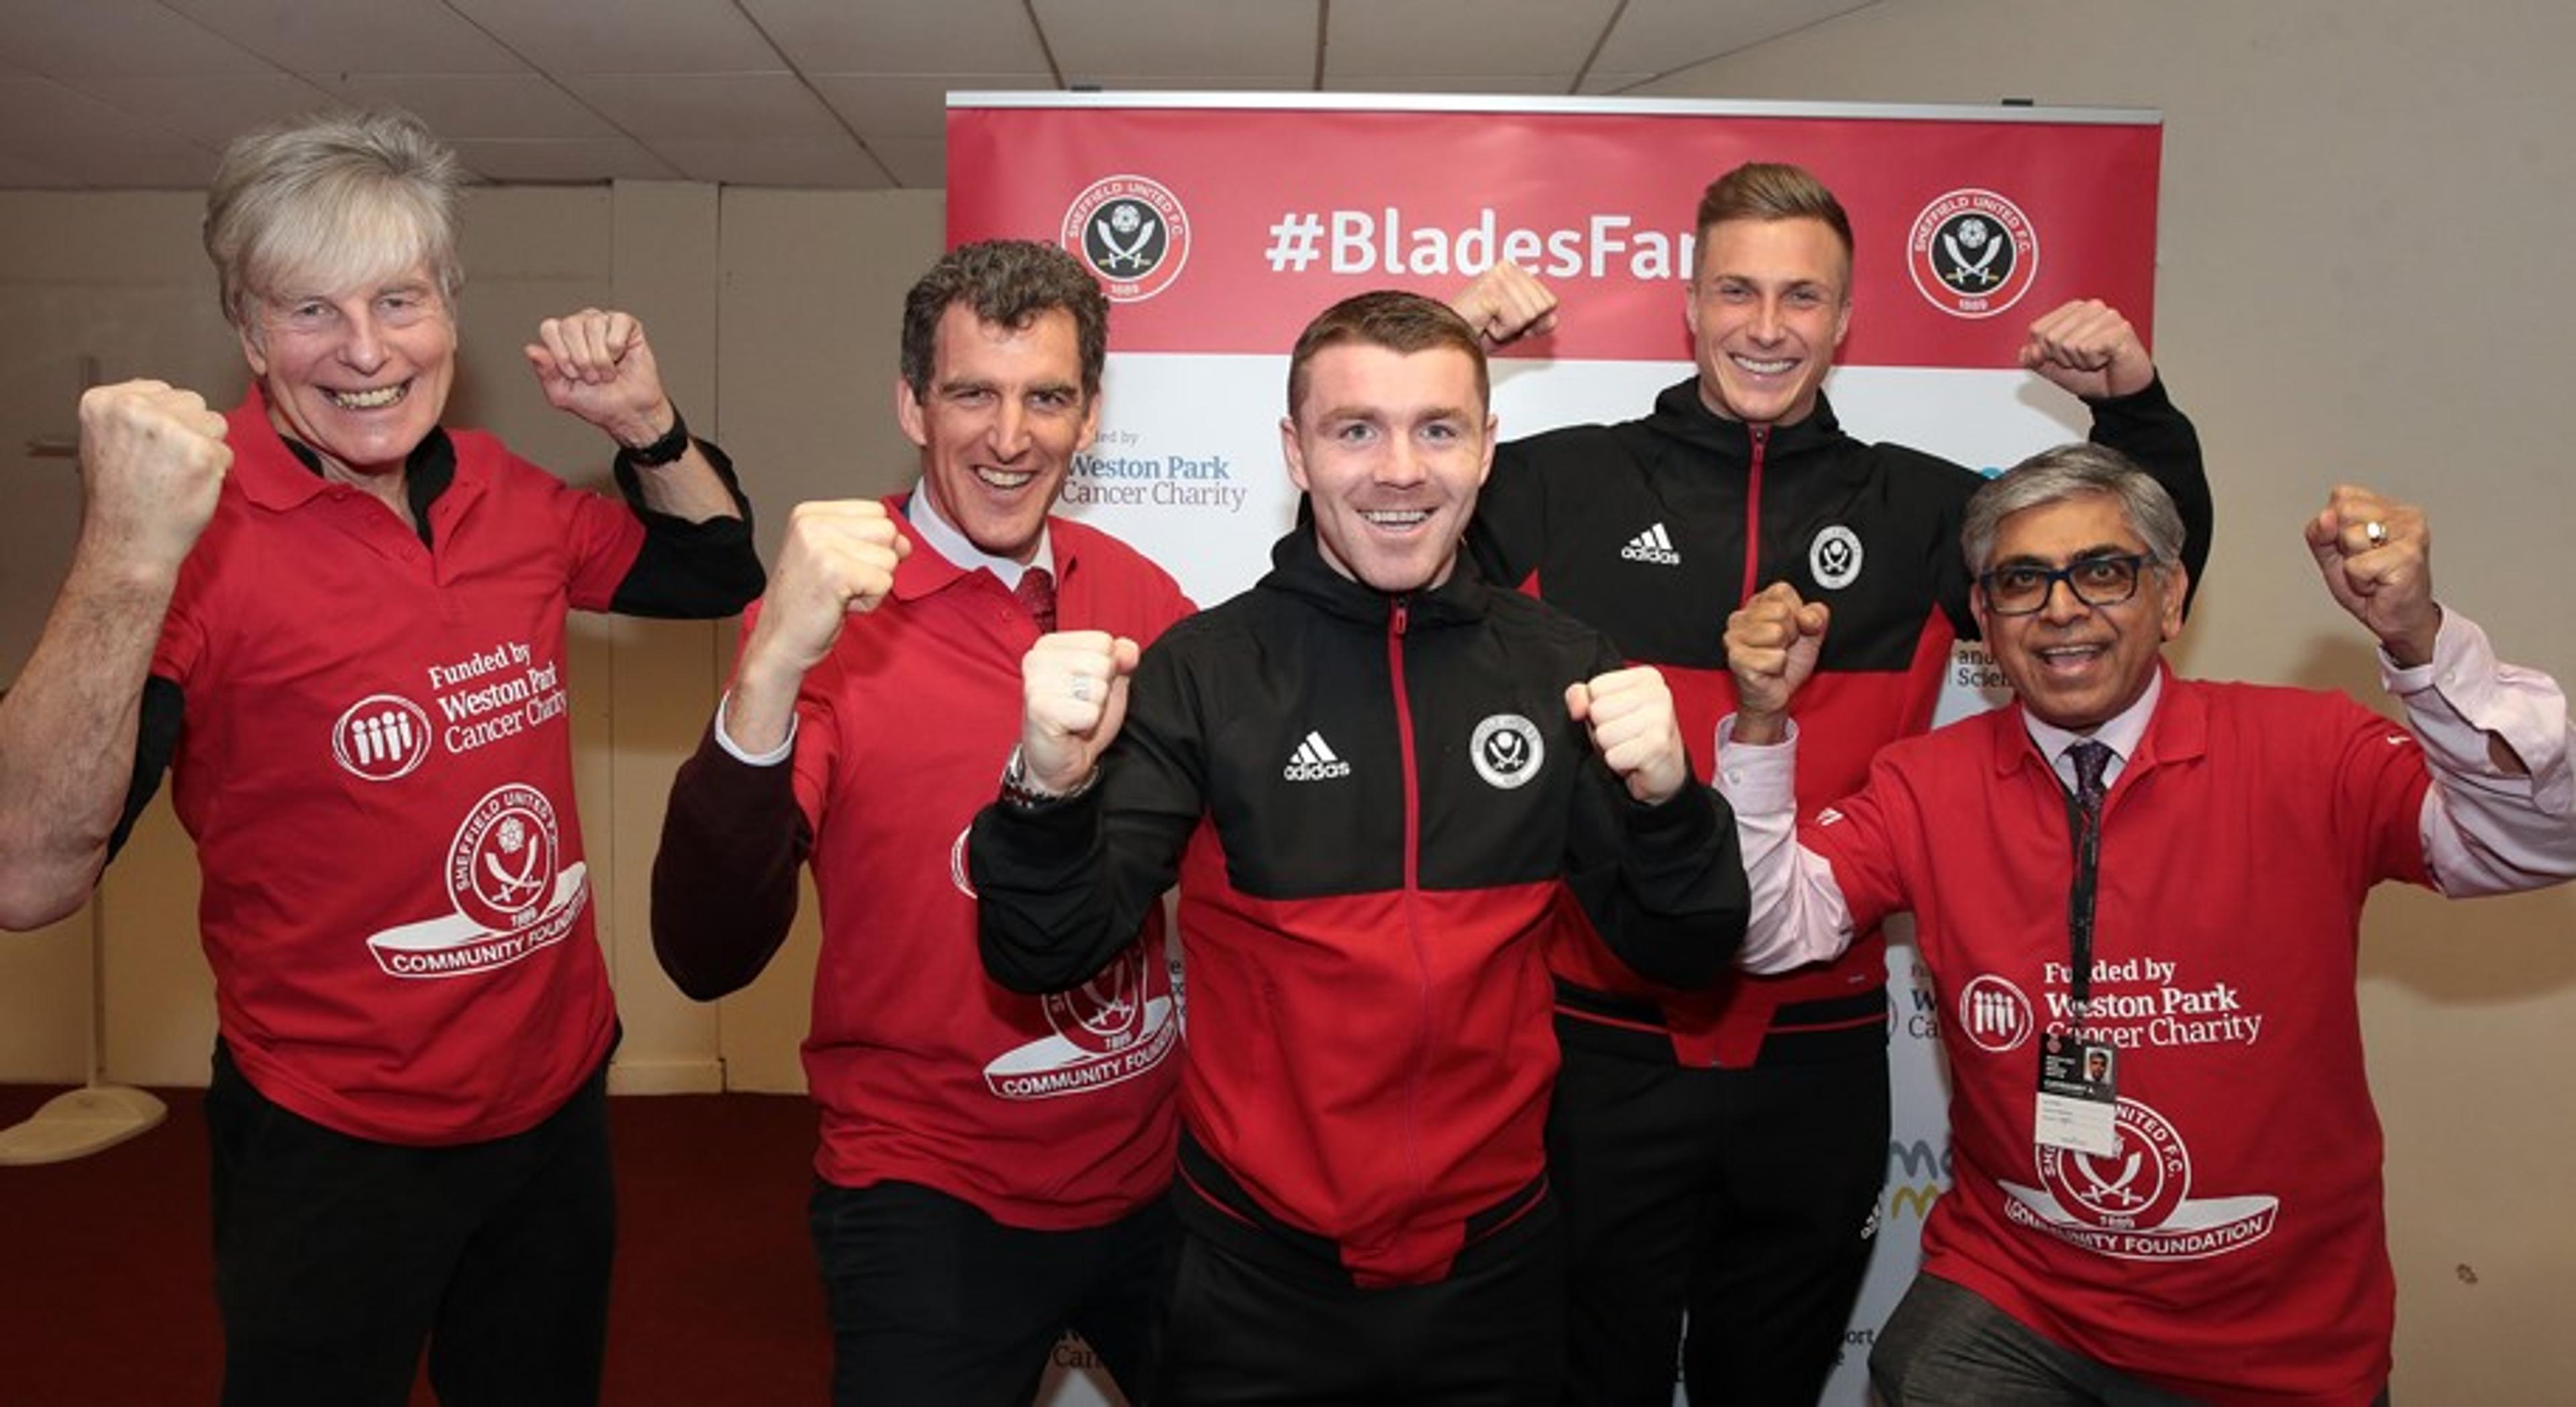 Five men cheering wearing red, black and red Sheffield United football clothing